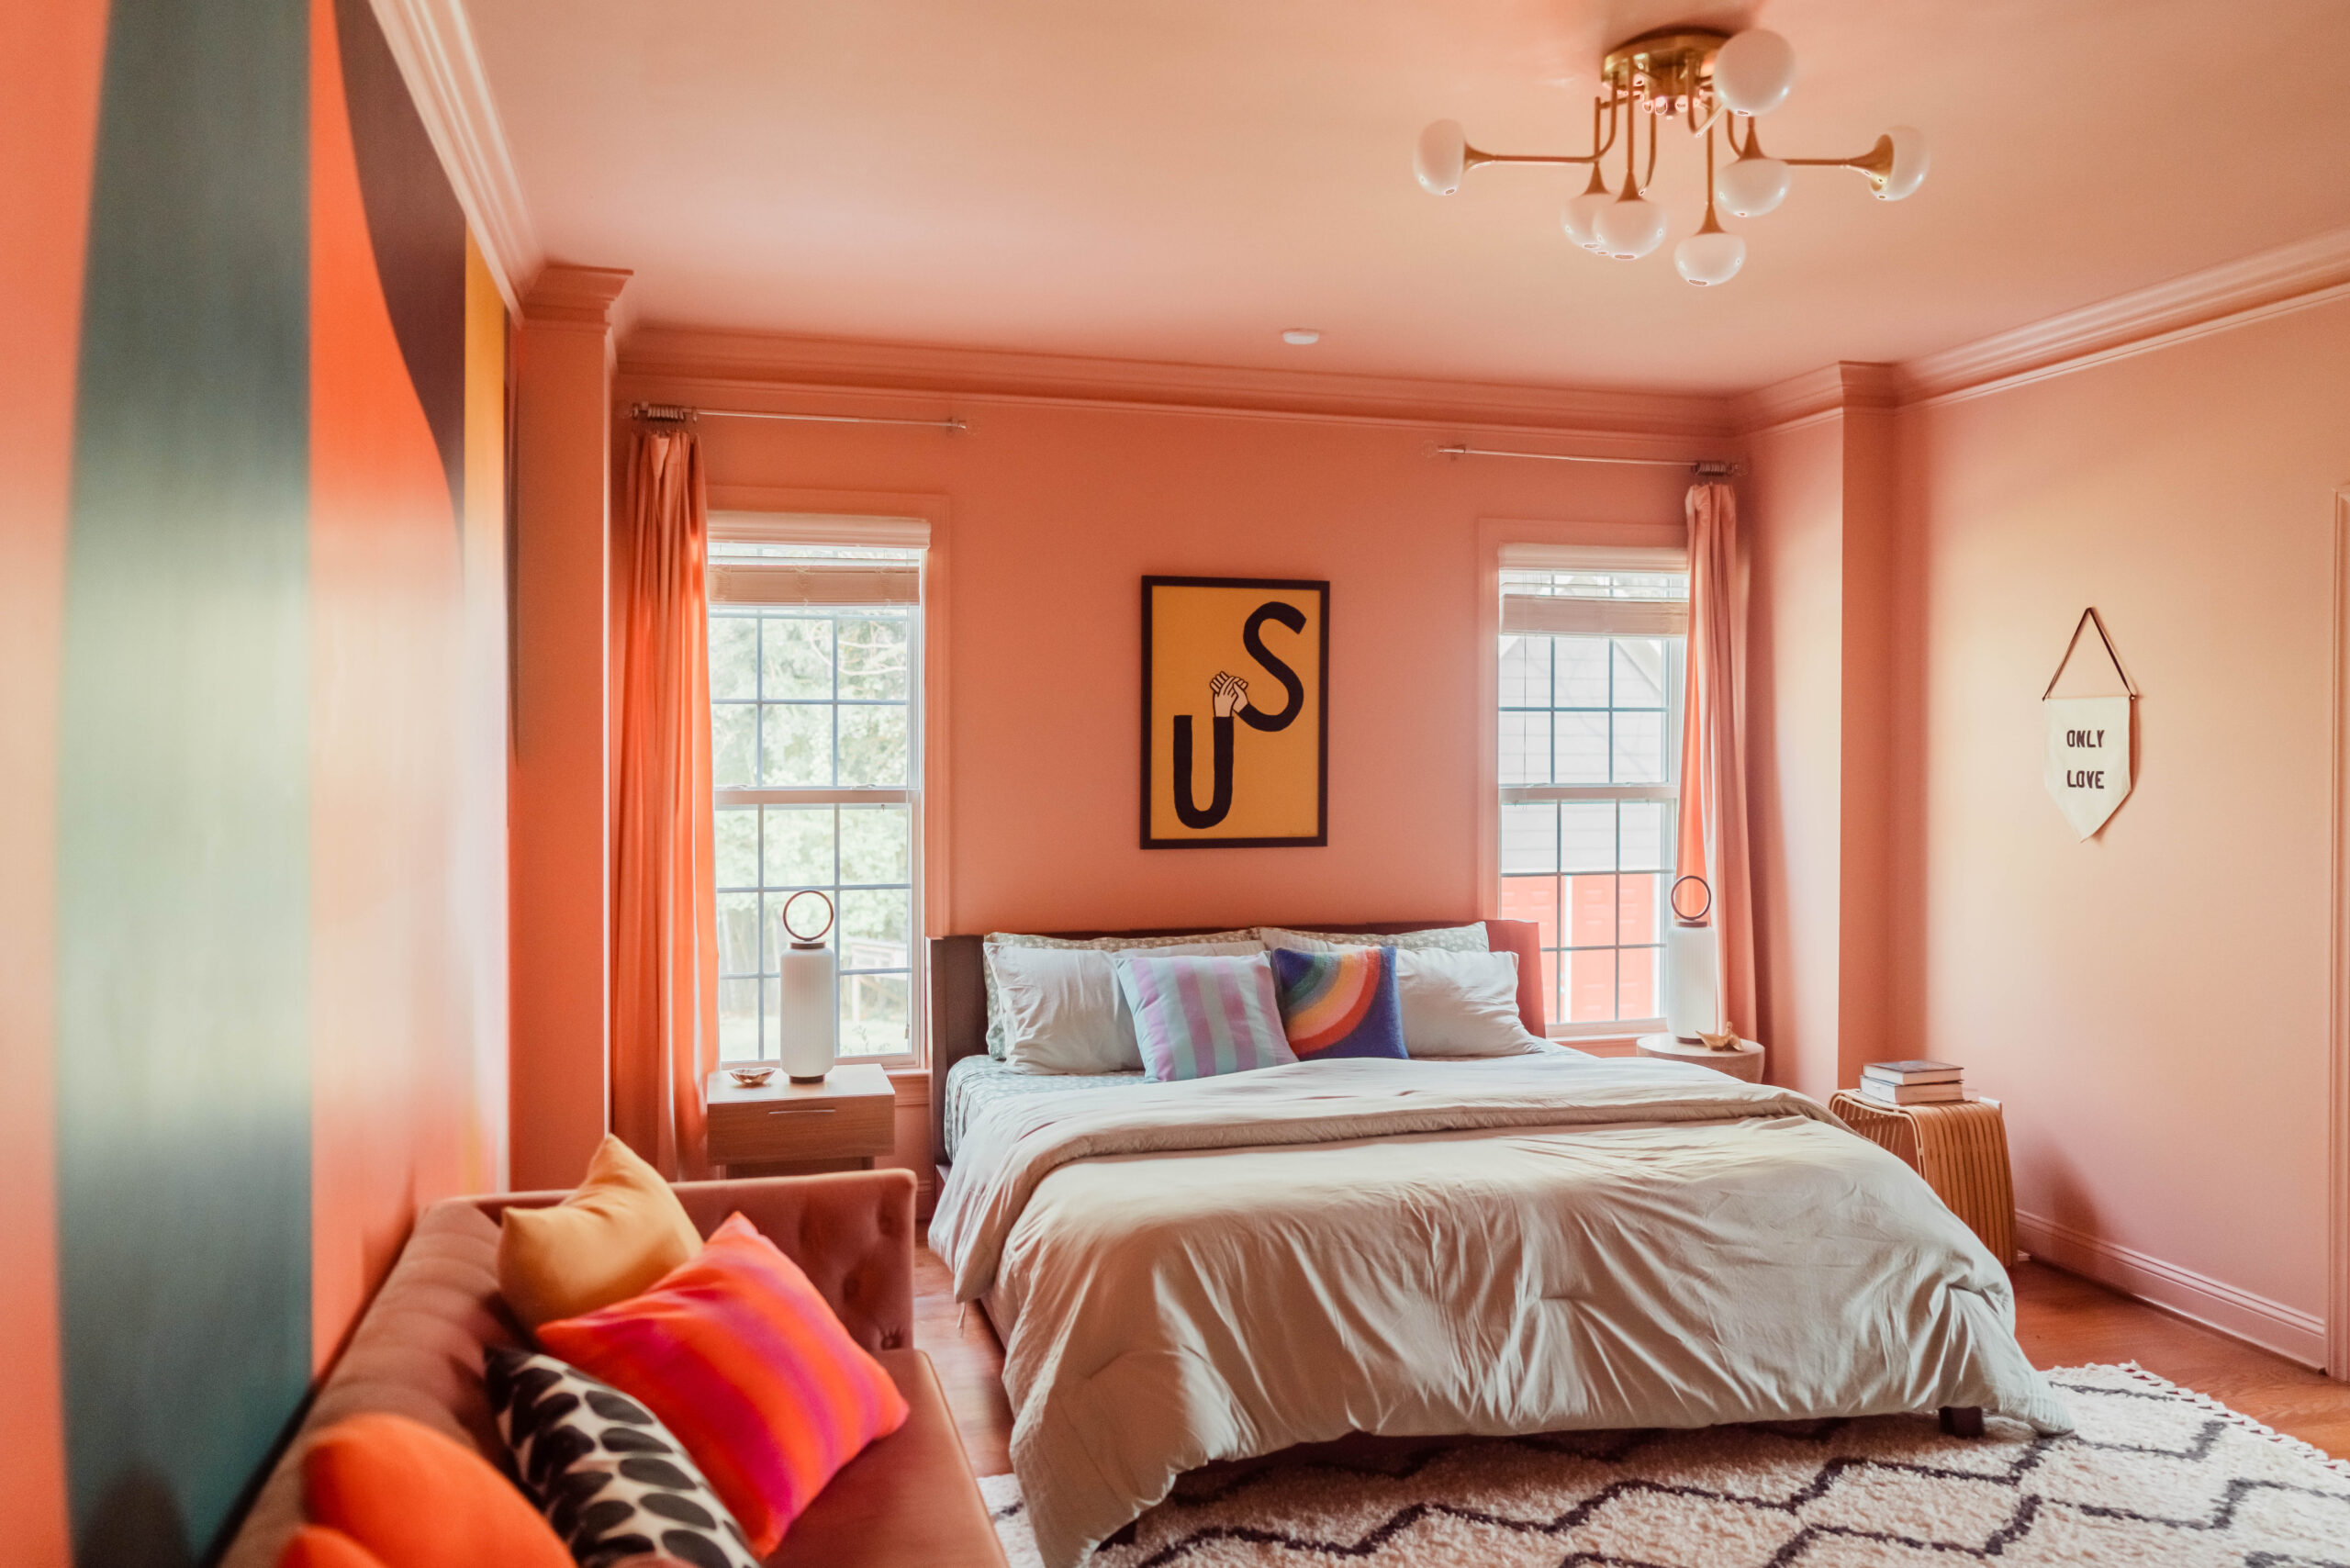 Color drenched bedroom in delightful color